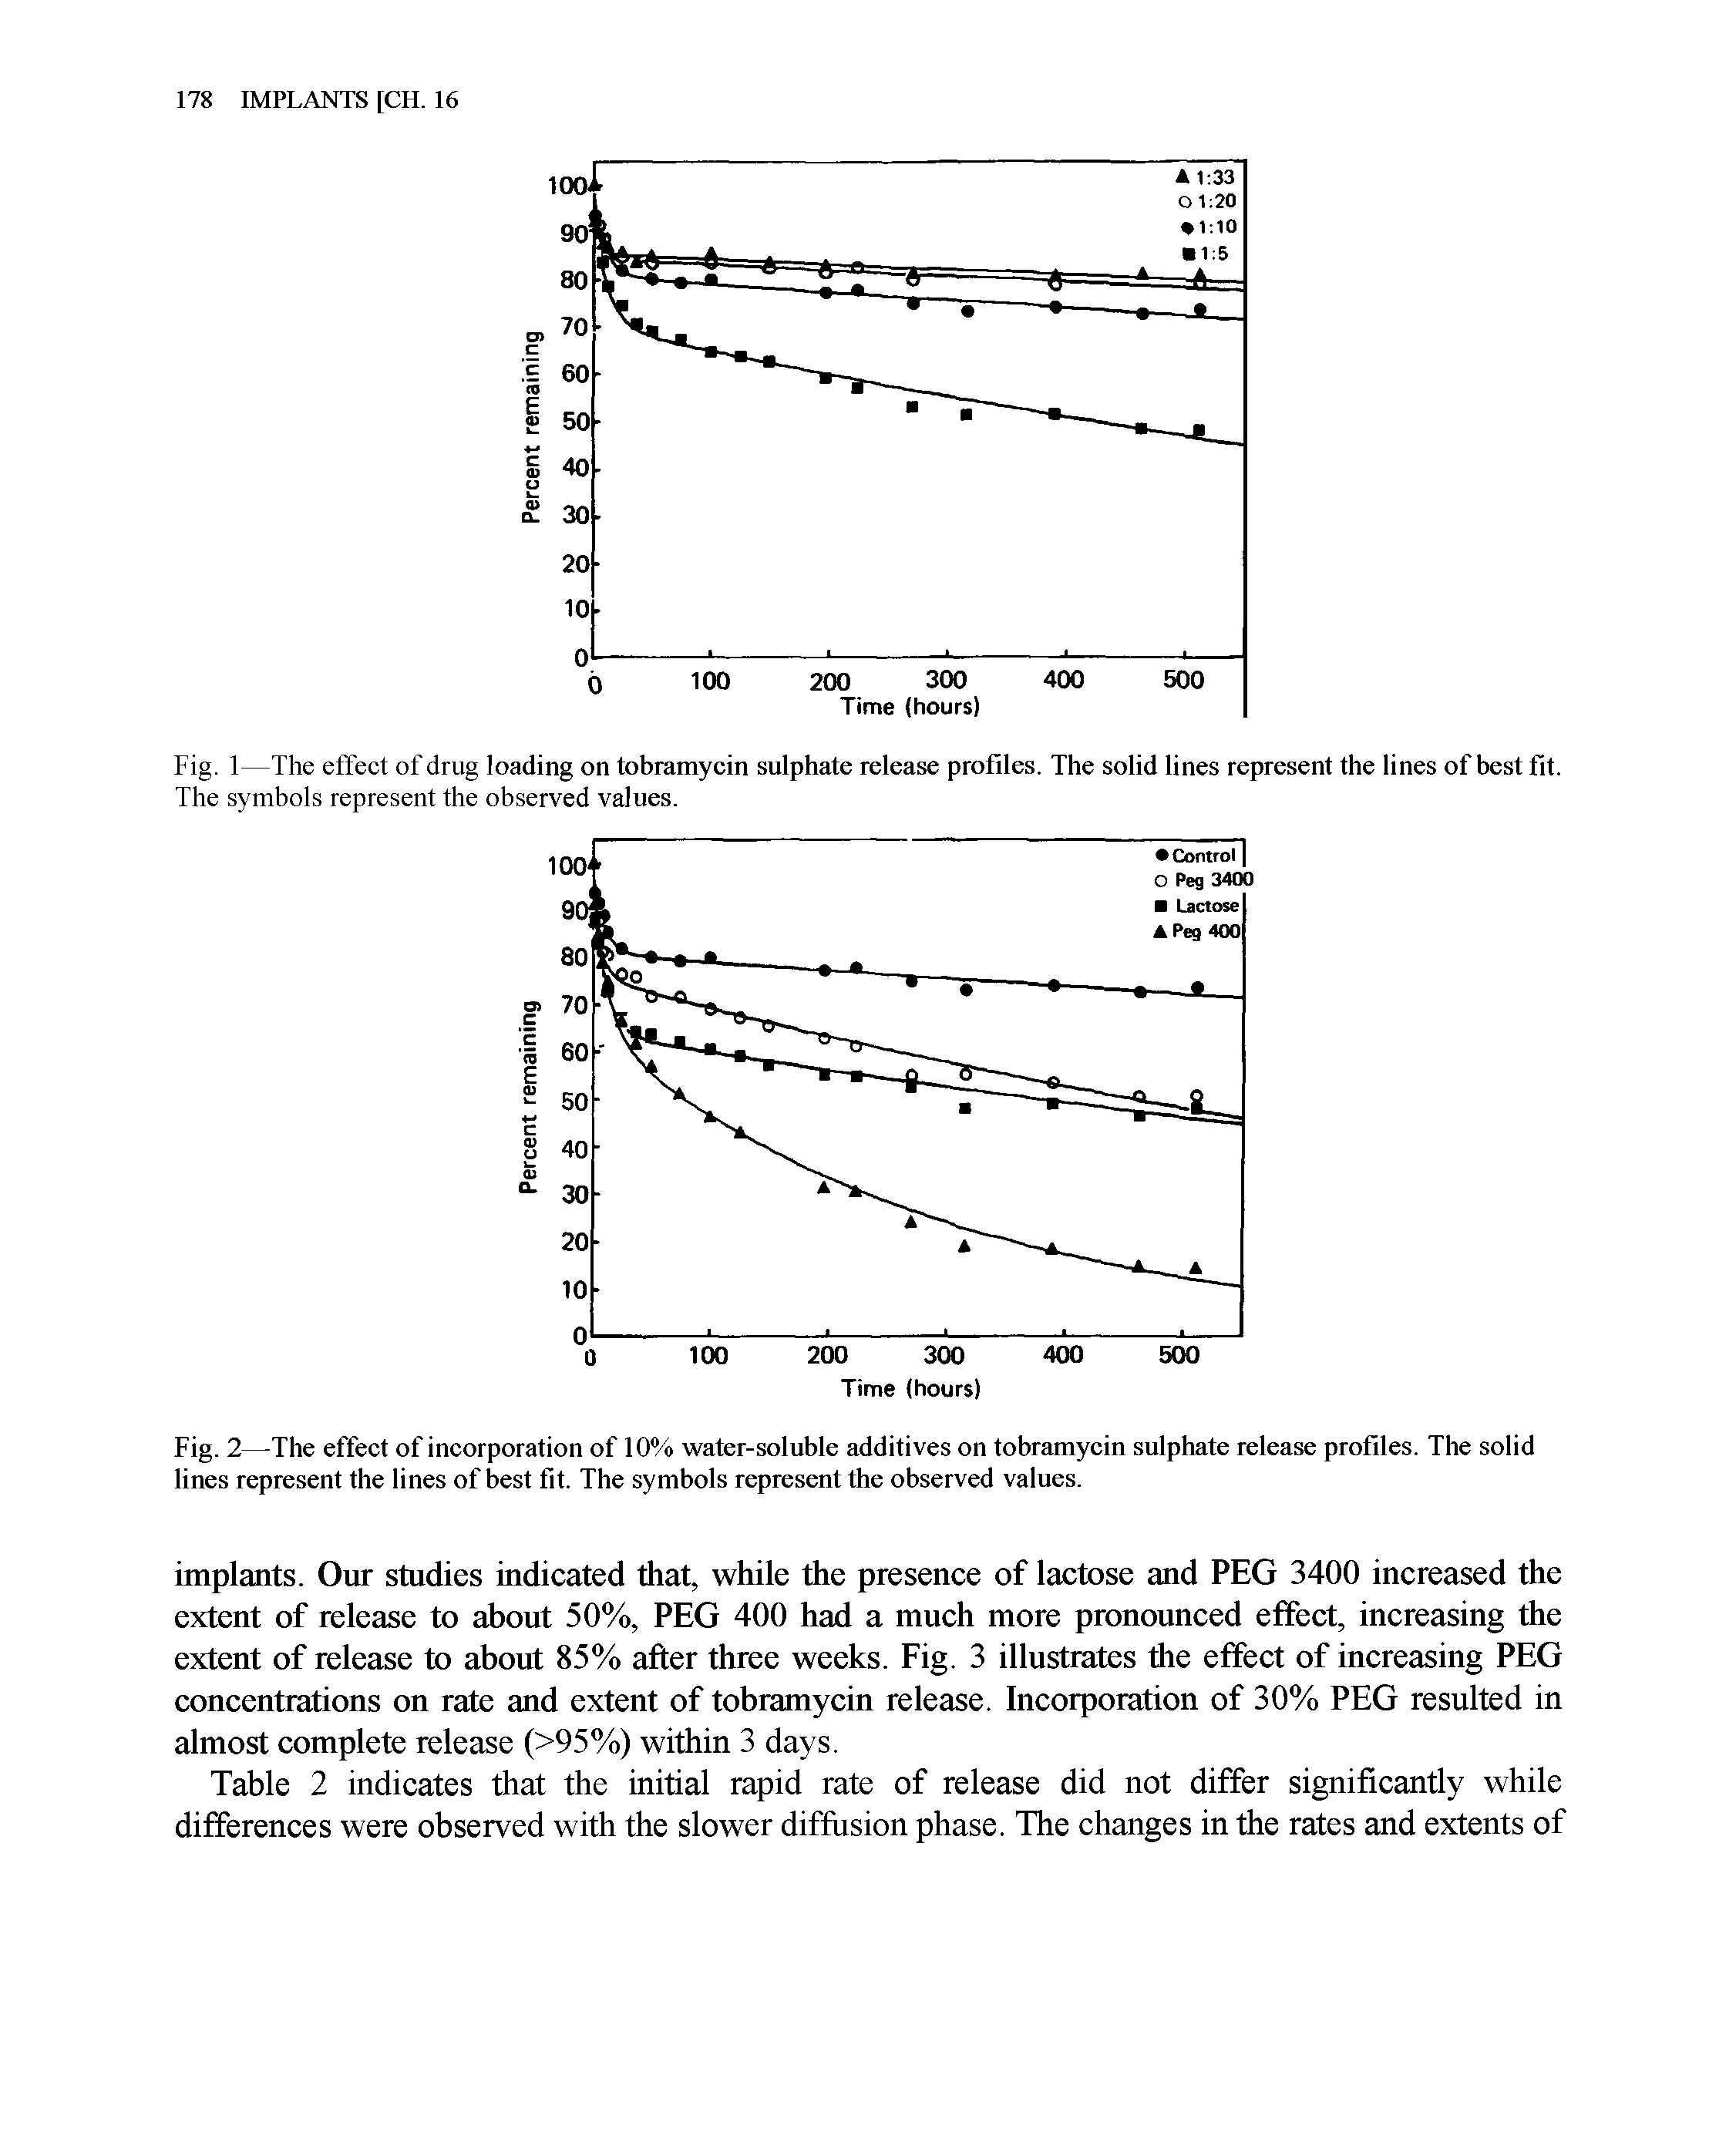 Fig. 1—The effect of drug loading on tobramycin sulphate release profiles. The solid lines represent the lines of best fit.